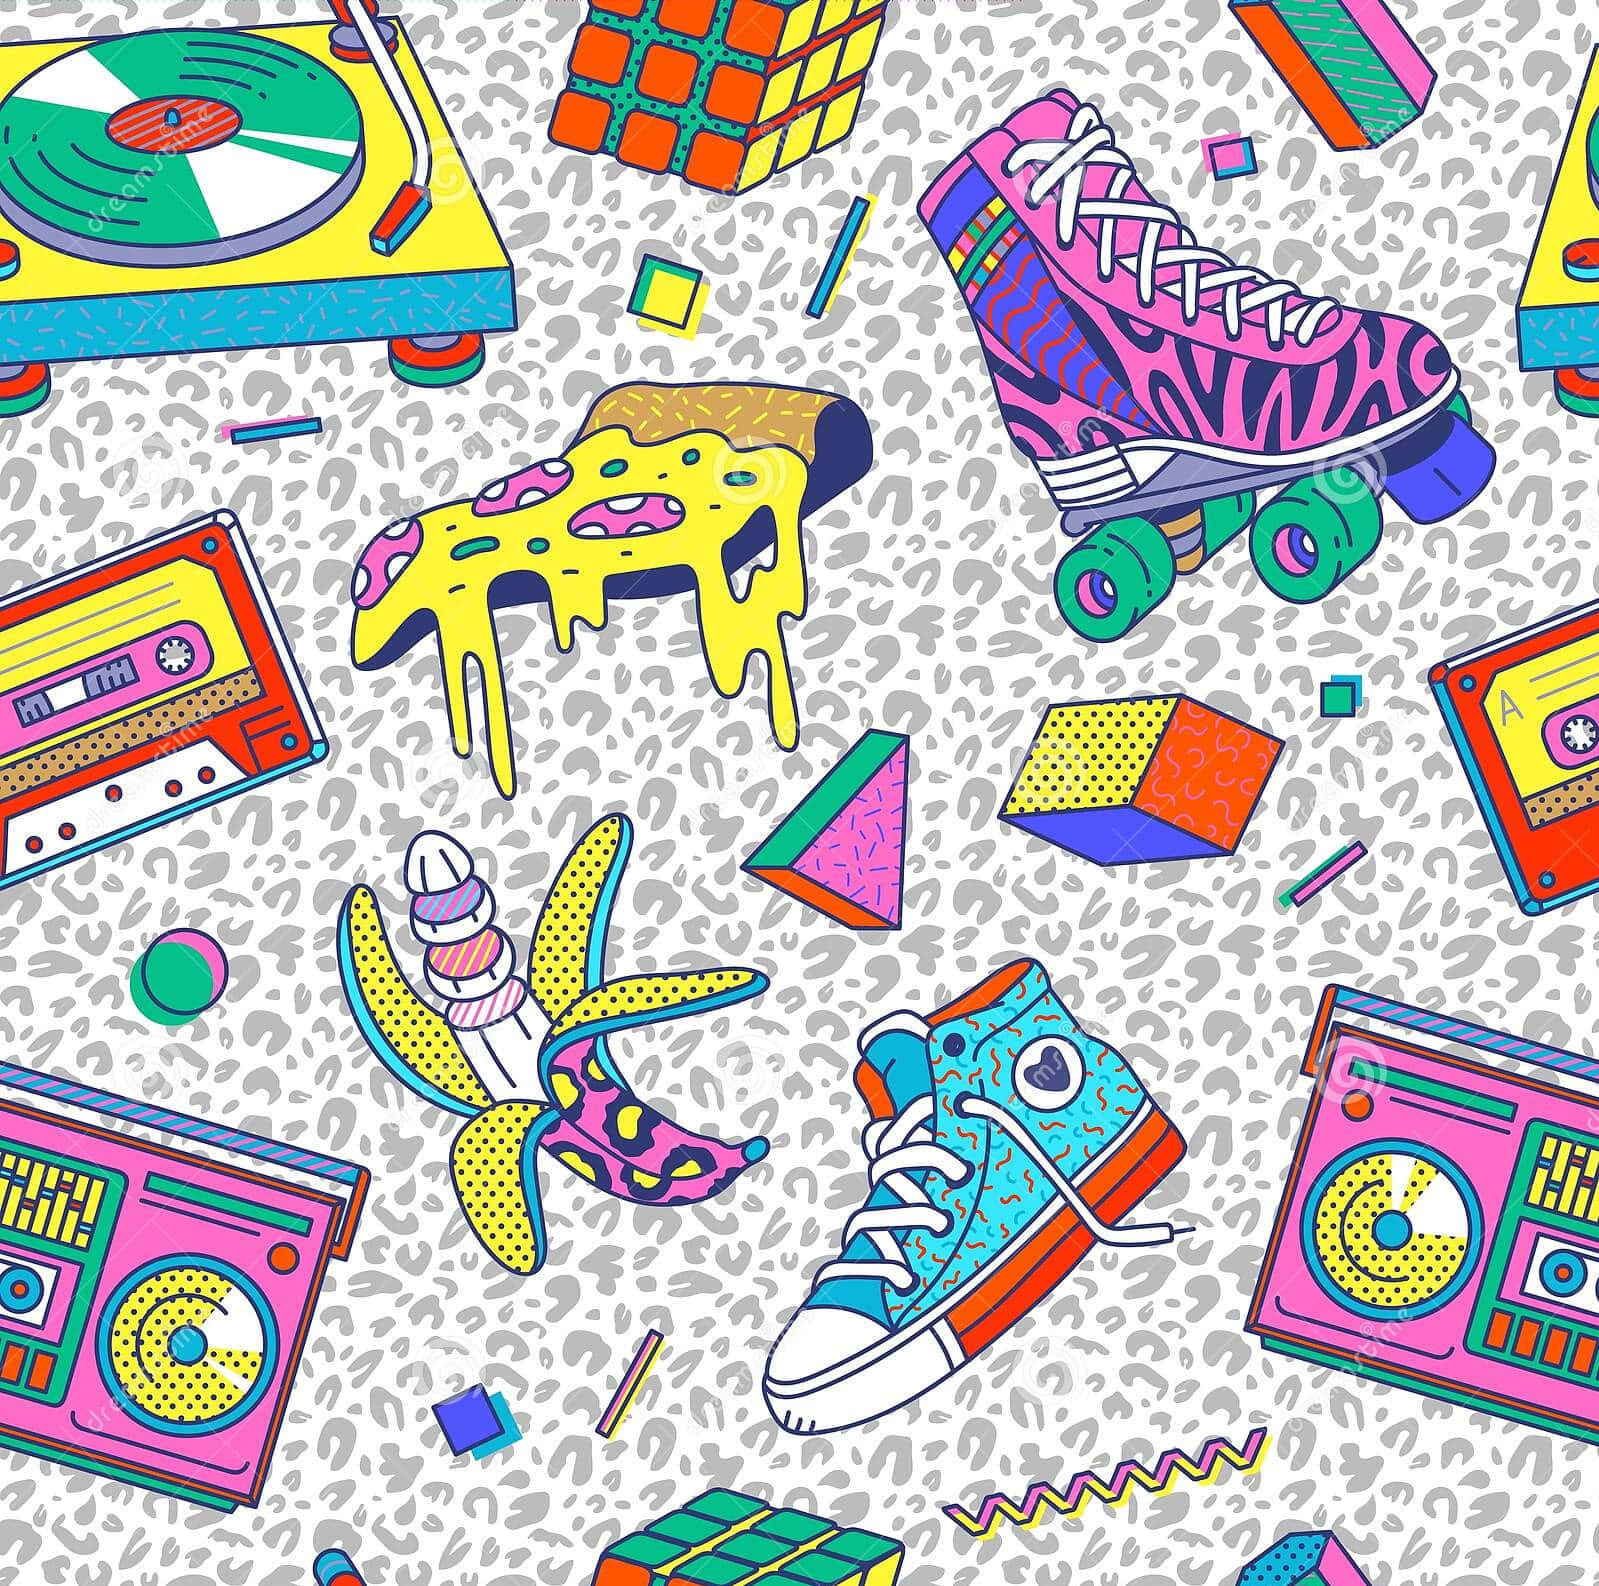 Download 90s Style With Retro Items Wallpaper 